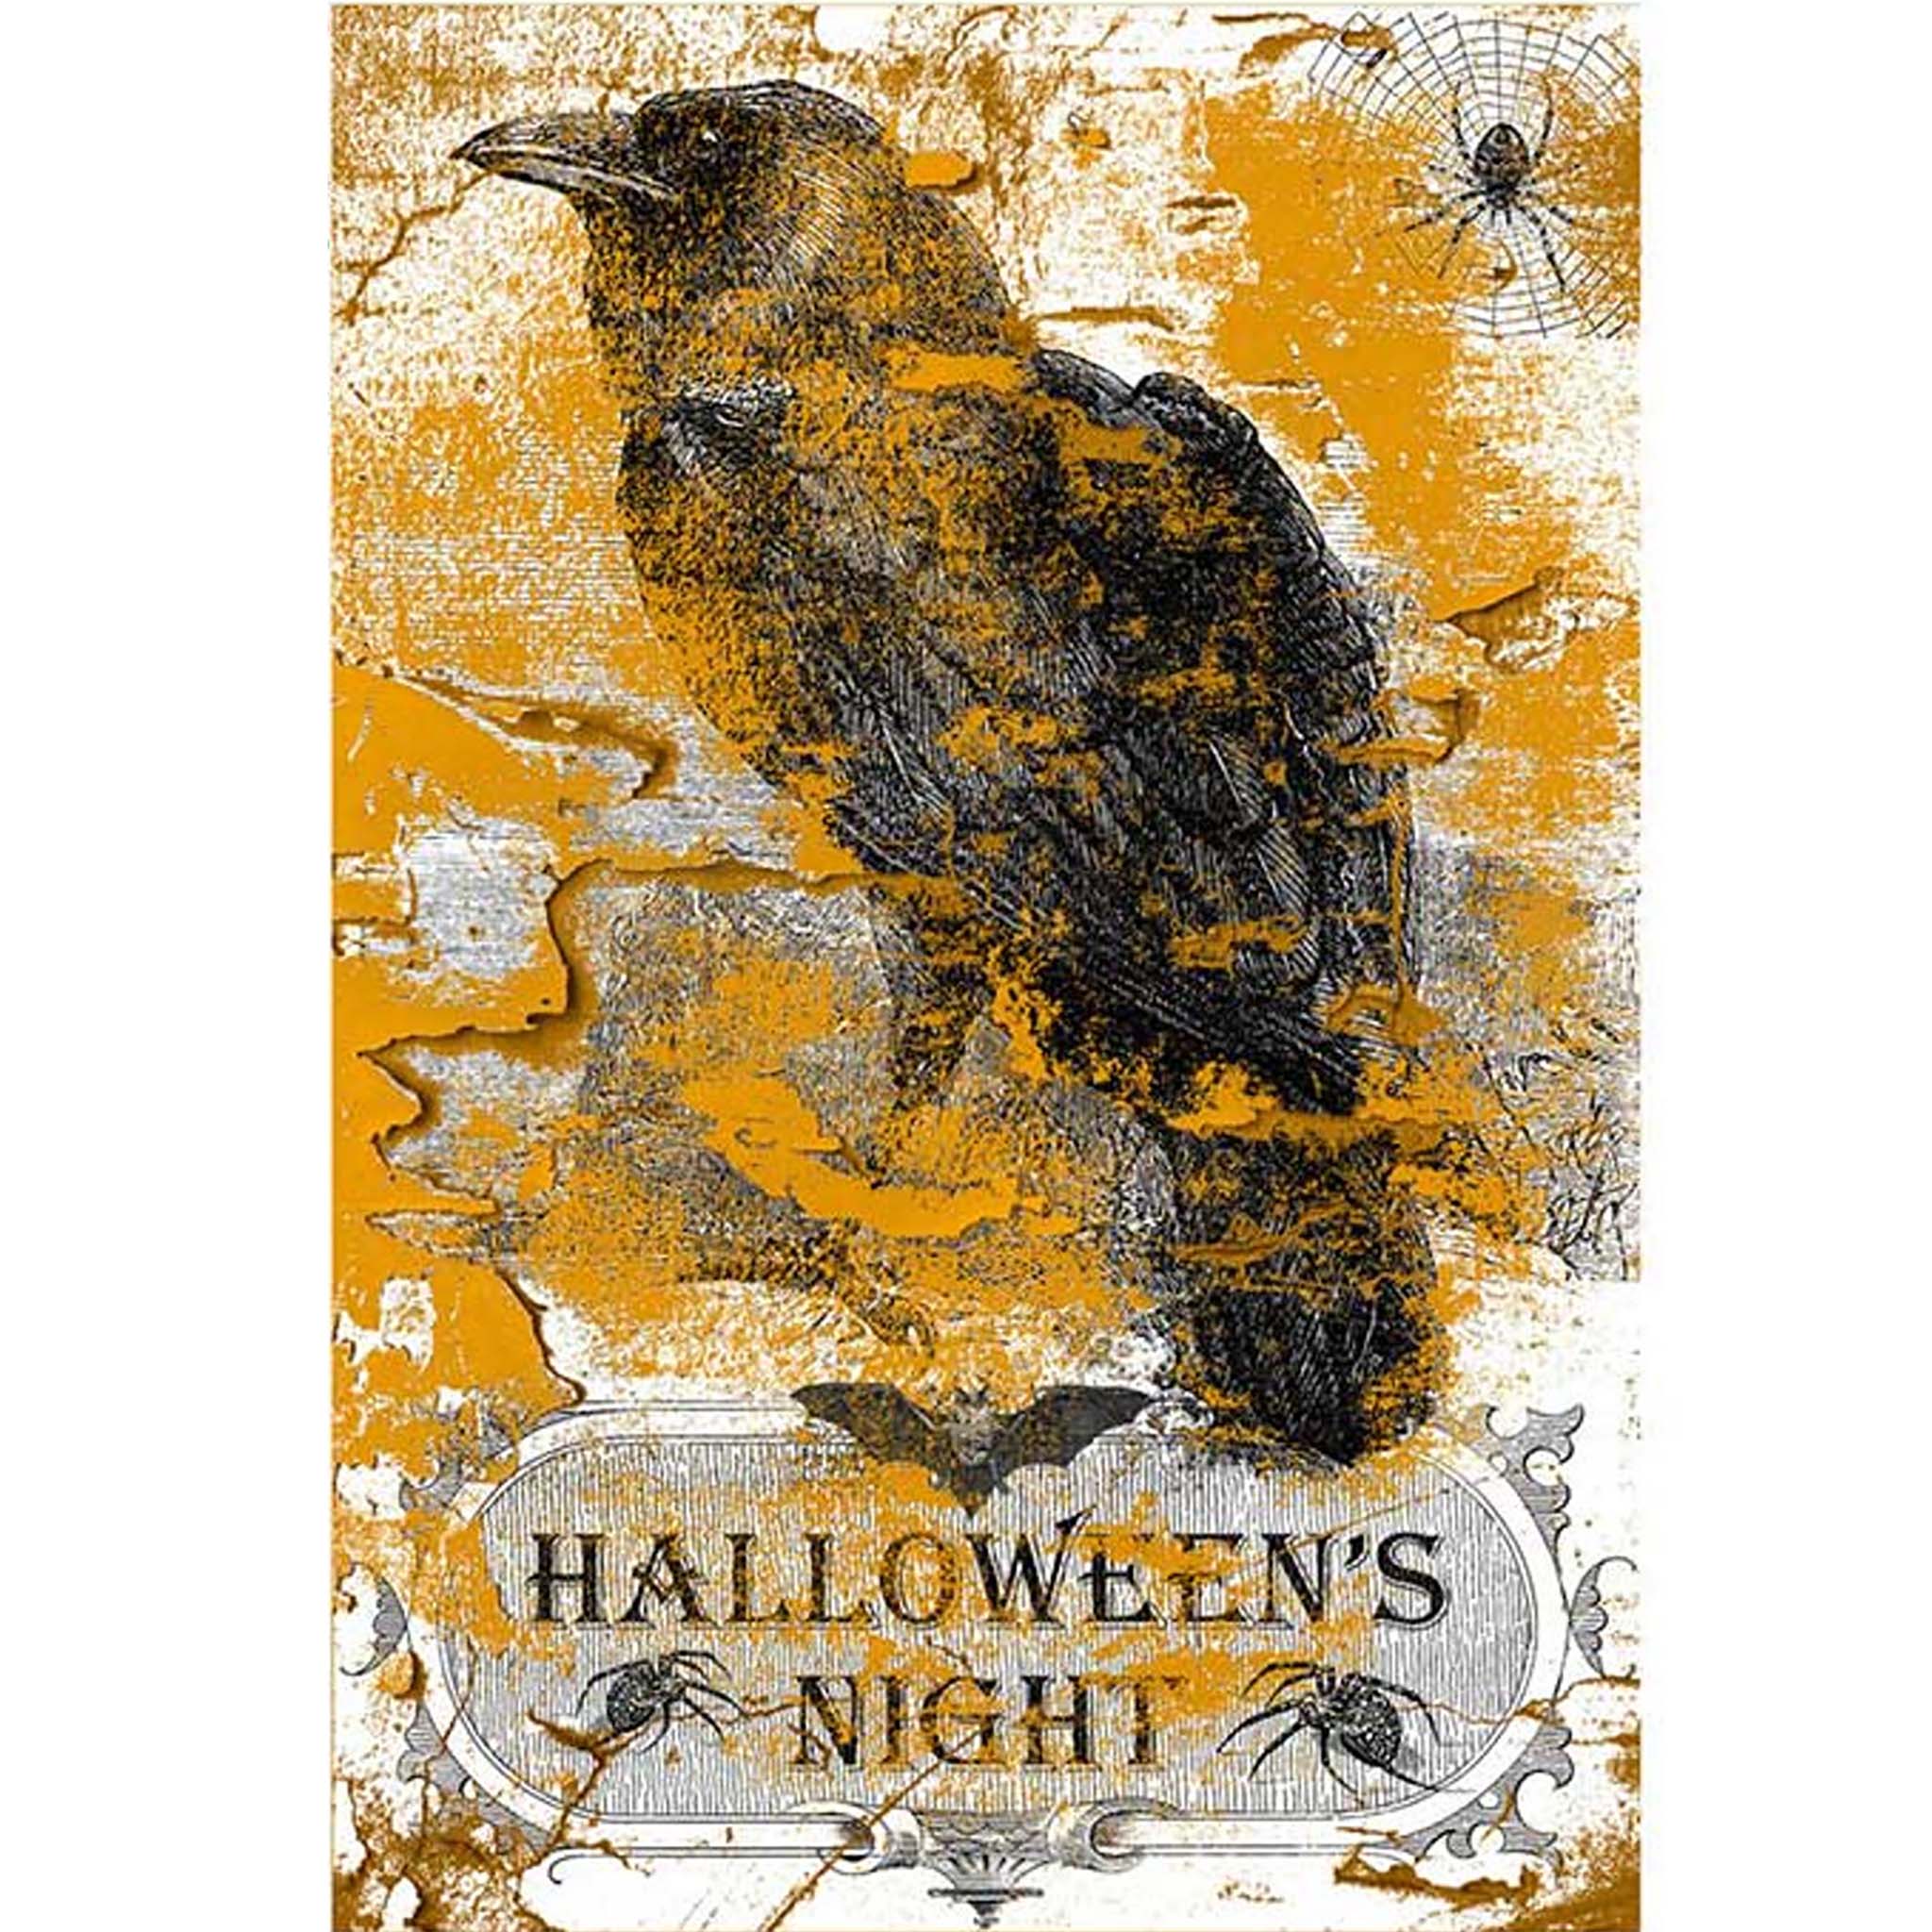 A3 rice paper that features a drawn raven and spider on a web with an orange sponge overlay. At the bottom is a sign that reads Halloween's Night. White borders are on the sides.